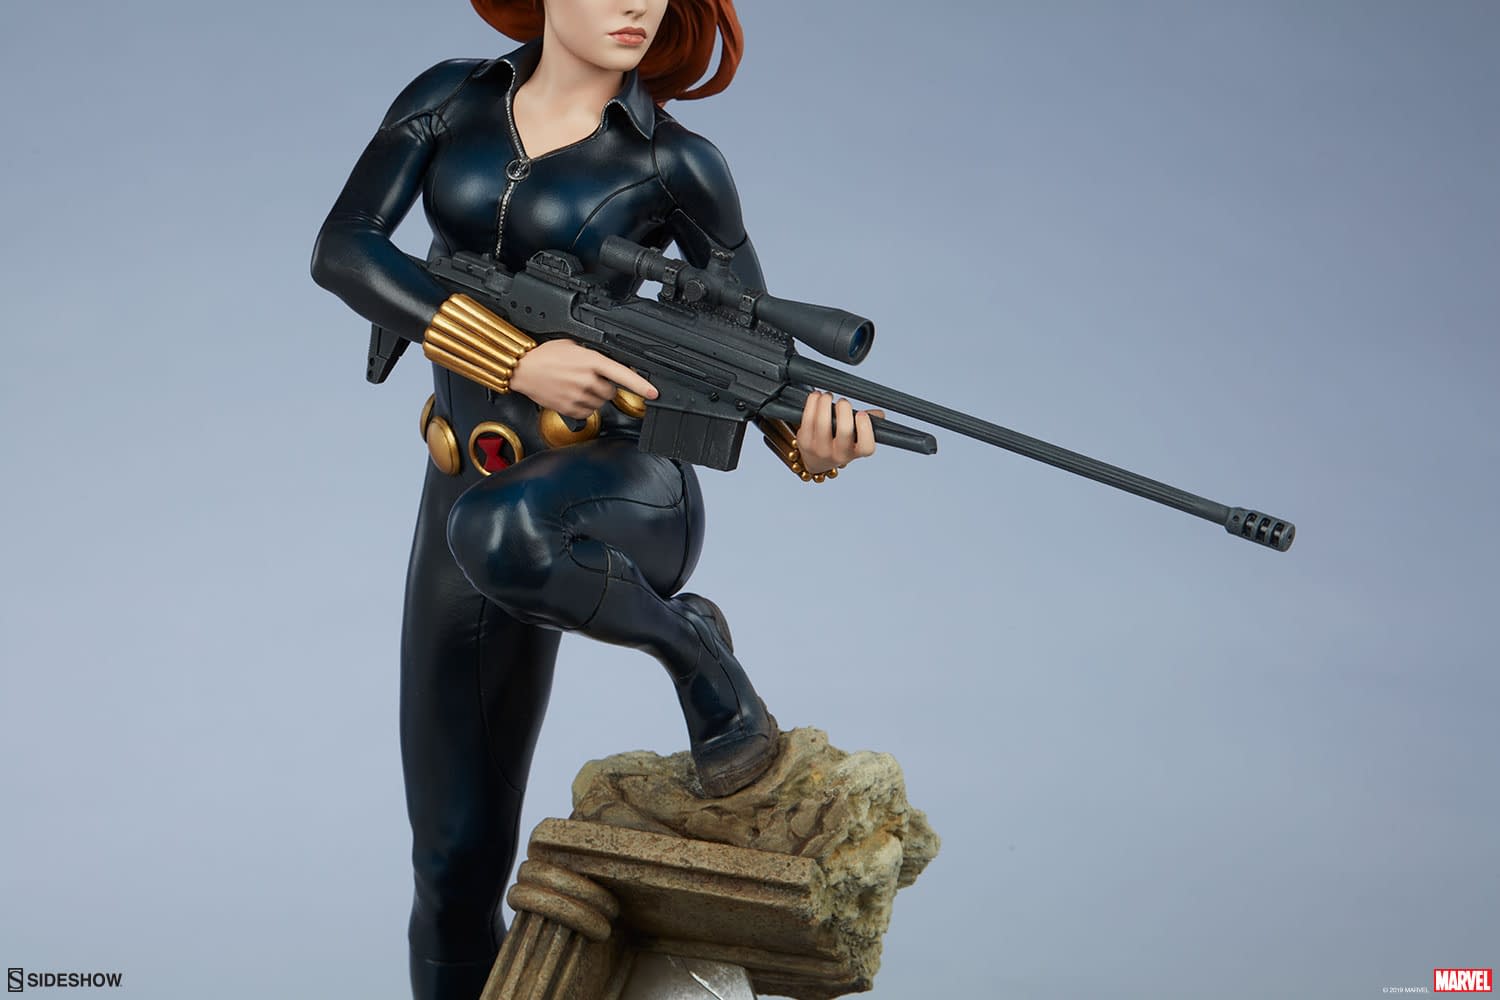 Black Widow Takes Aim in the New Sideshow Collectible Statue